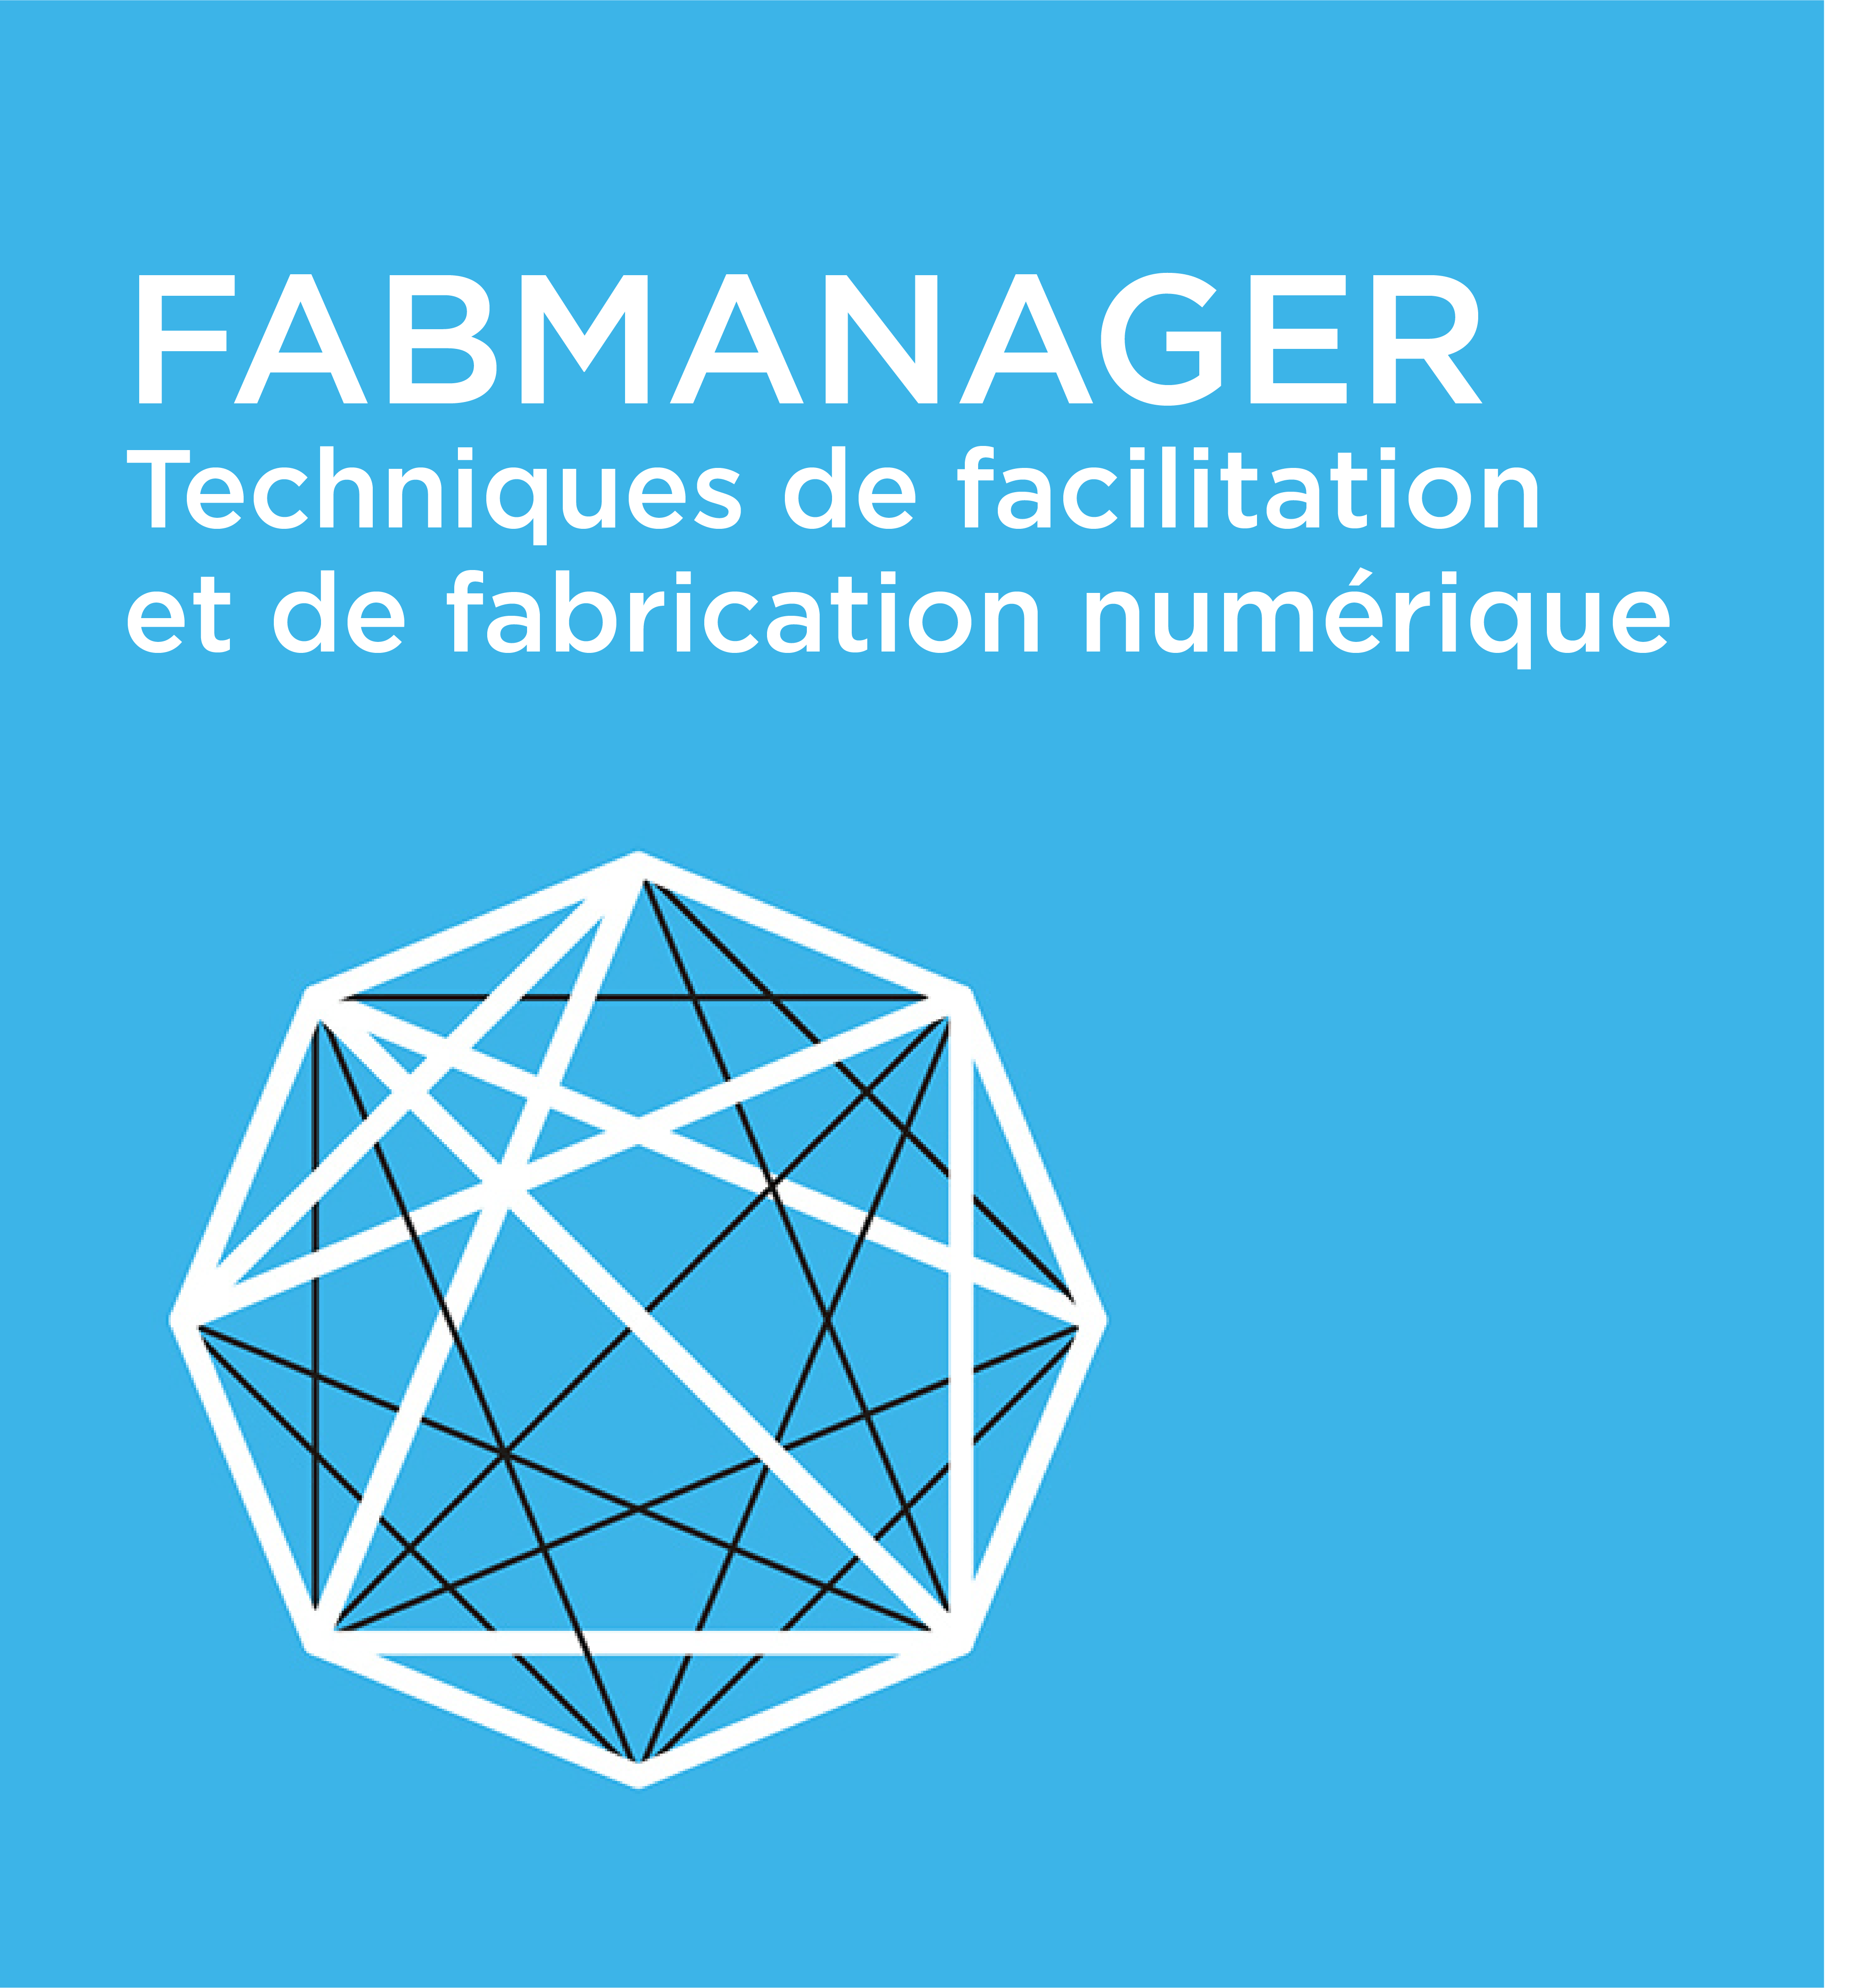 Fabmanager training